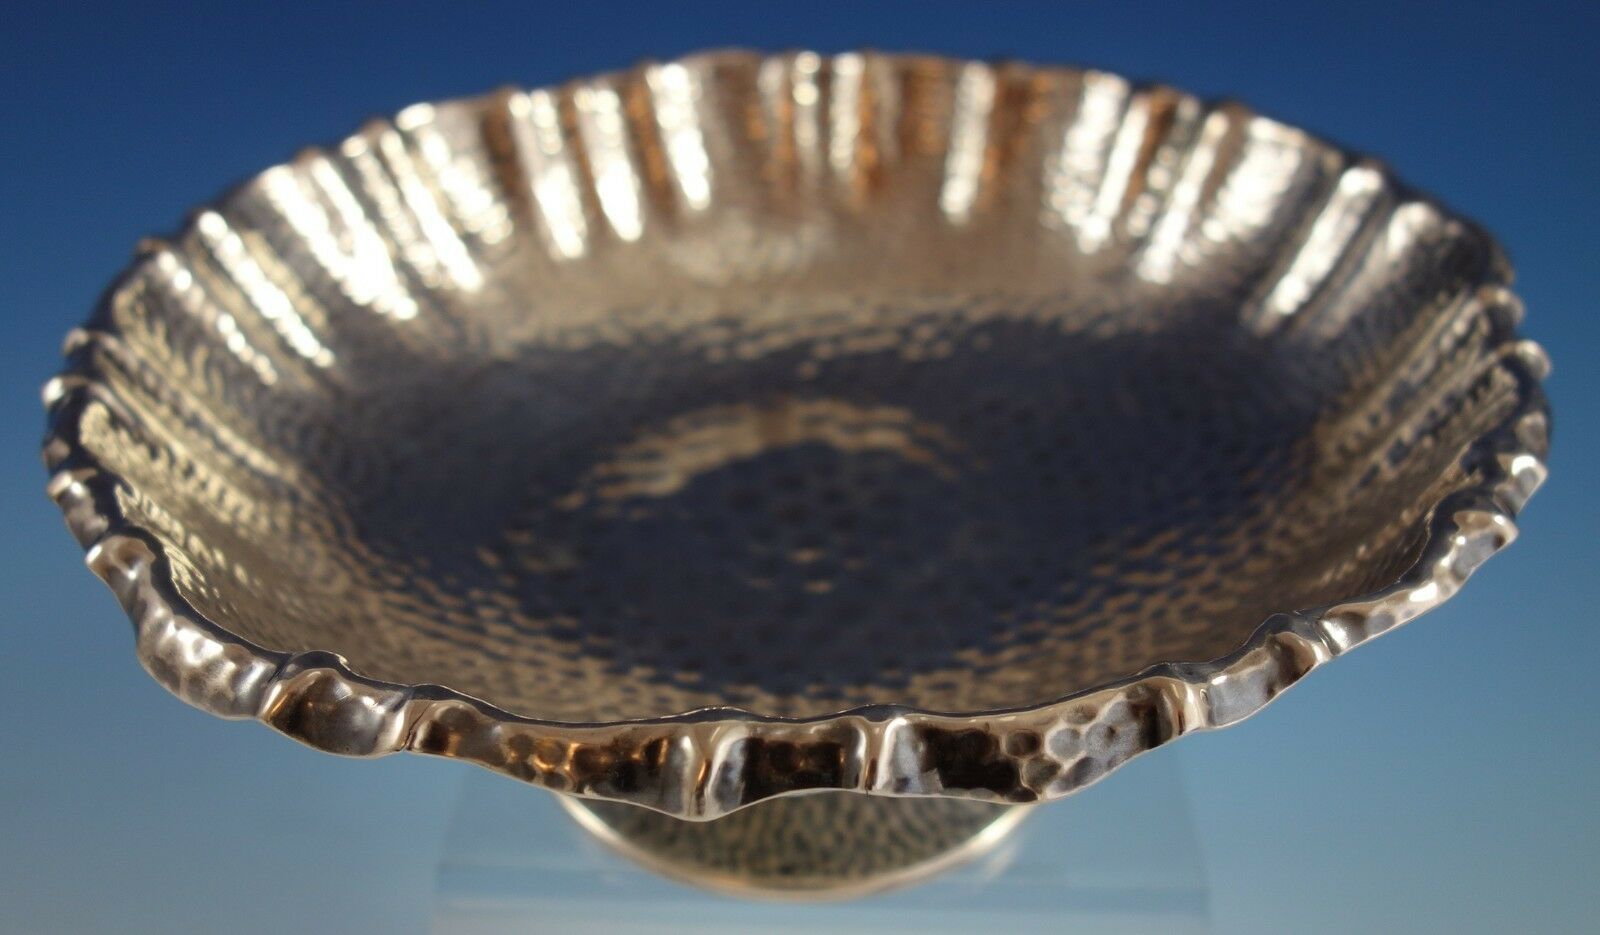 Primary image for Antique Hammered by Gorham Sterling Silver Bowl Raised 8 5/8" x 3 1/4" (#2540)